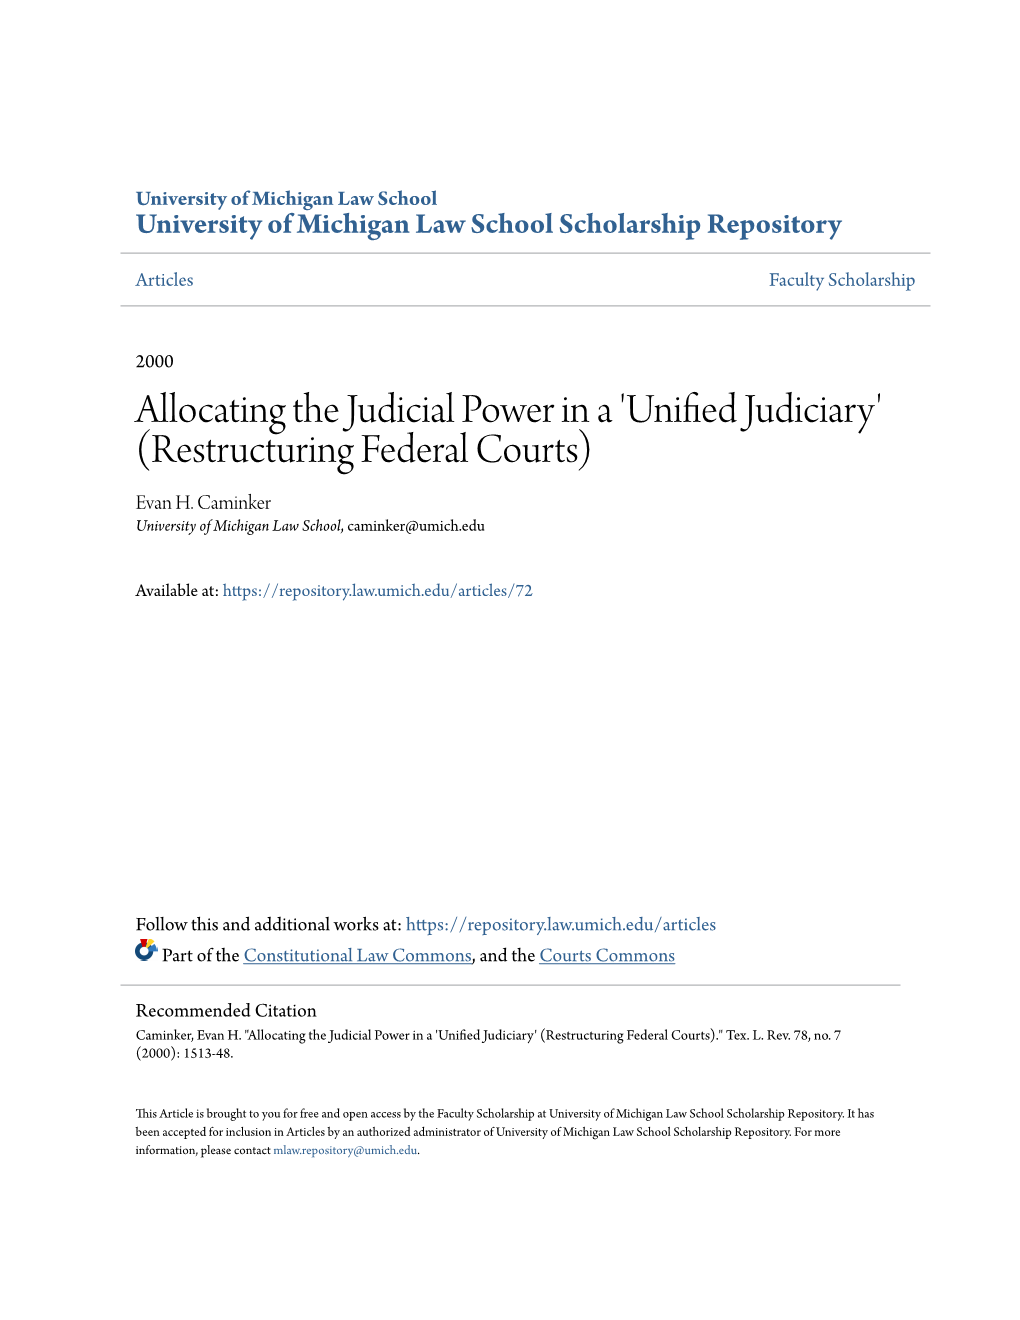 Allocating the Judicial Power in a 'Unified Judiciary' (Restructuring Federal Courts)." Tex